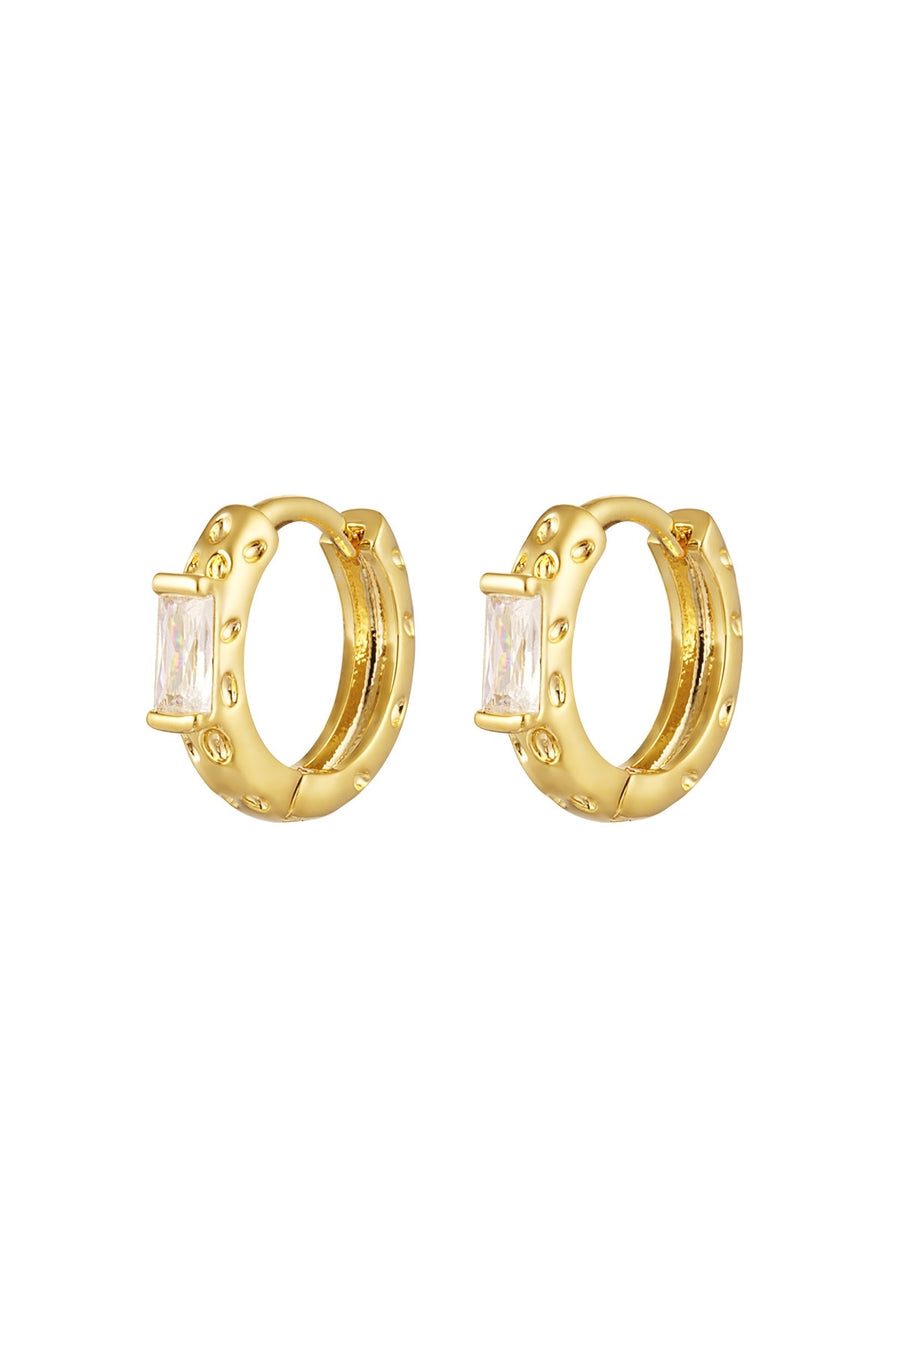 Taylor Hoops Earrings - Gold & Silver available